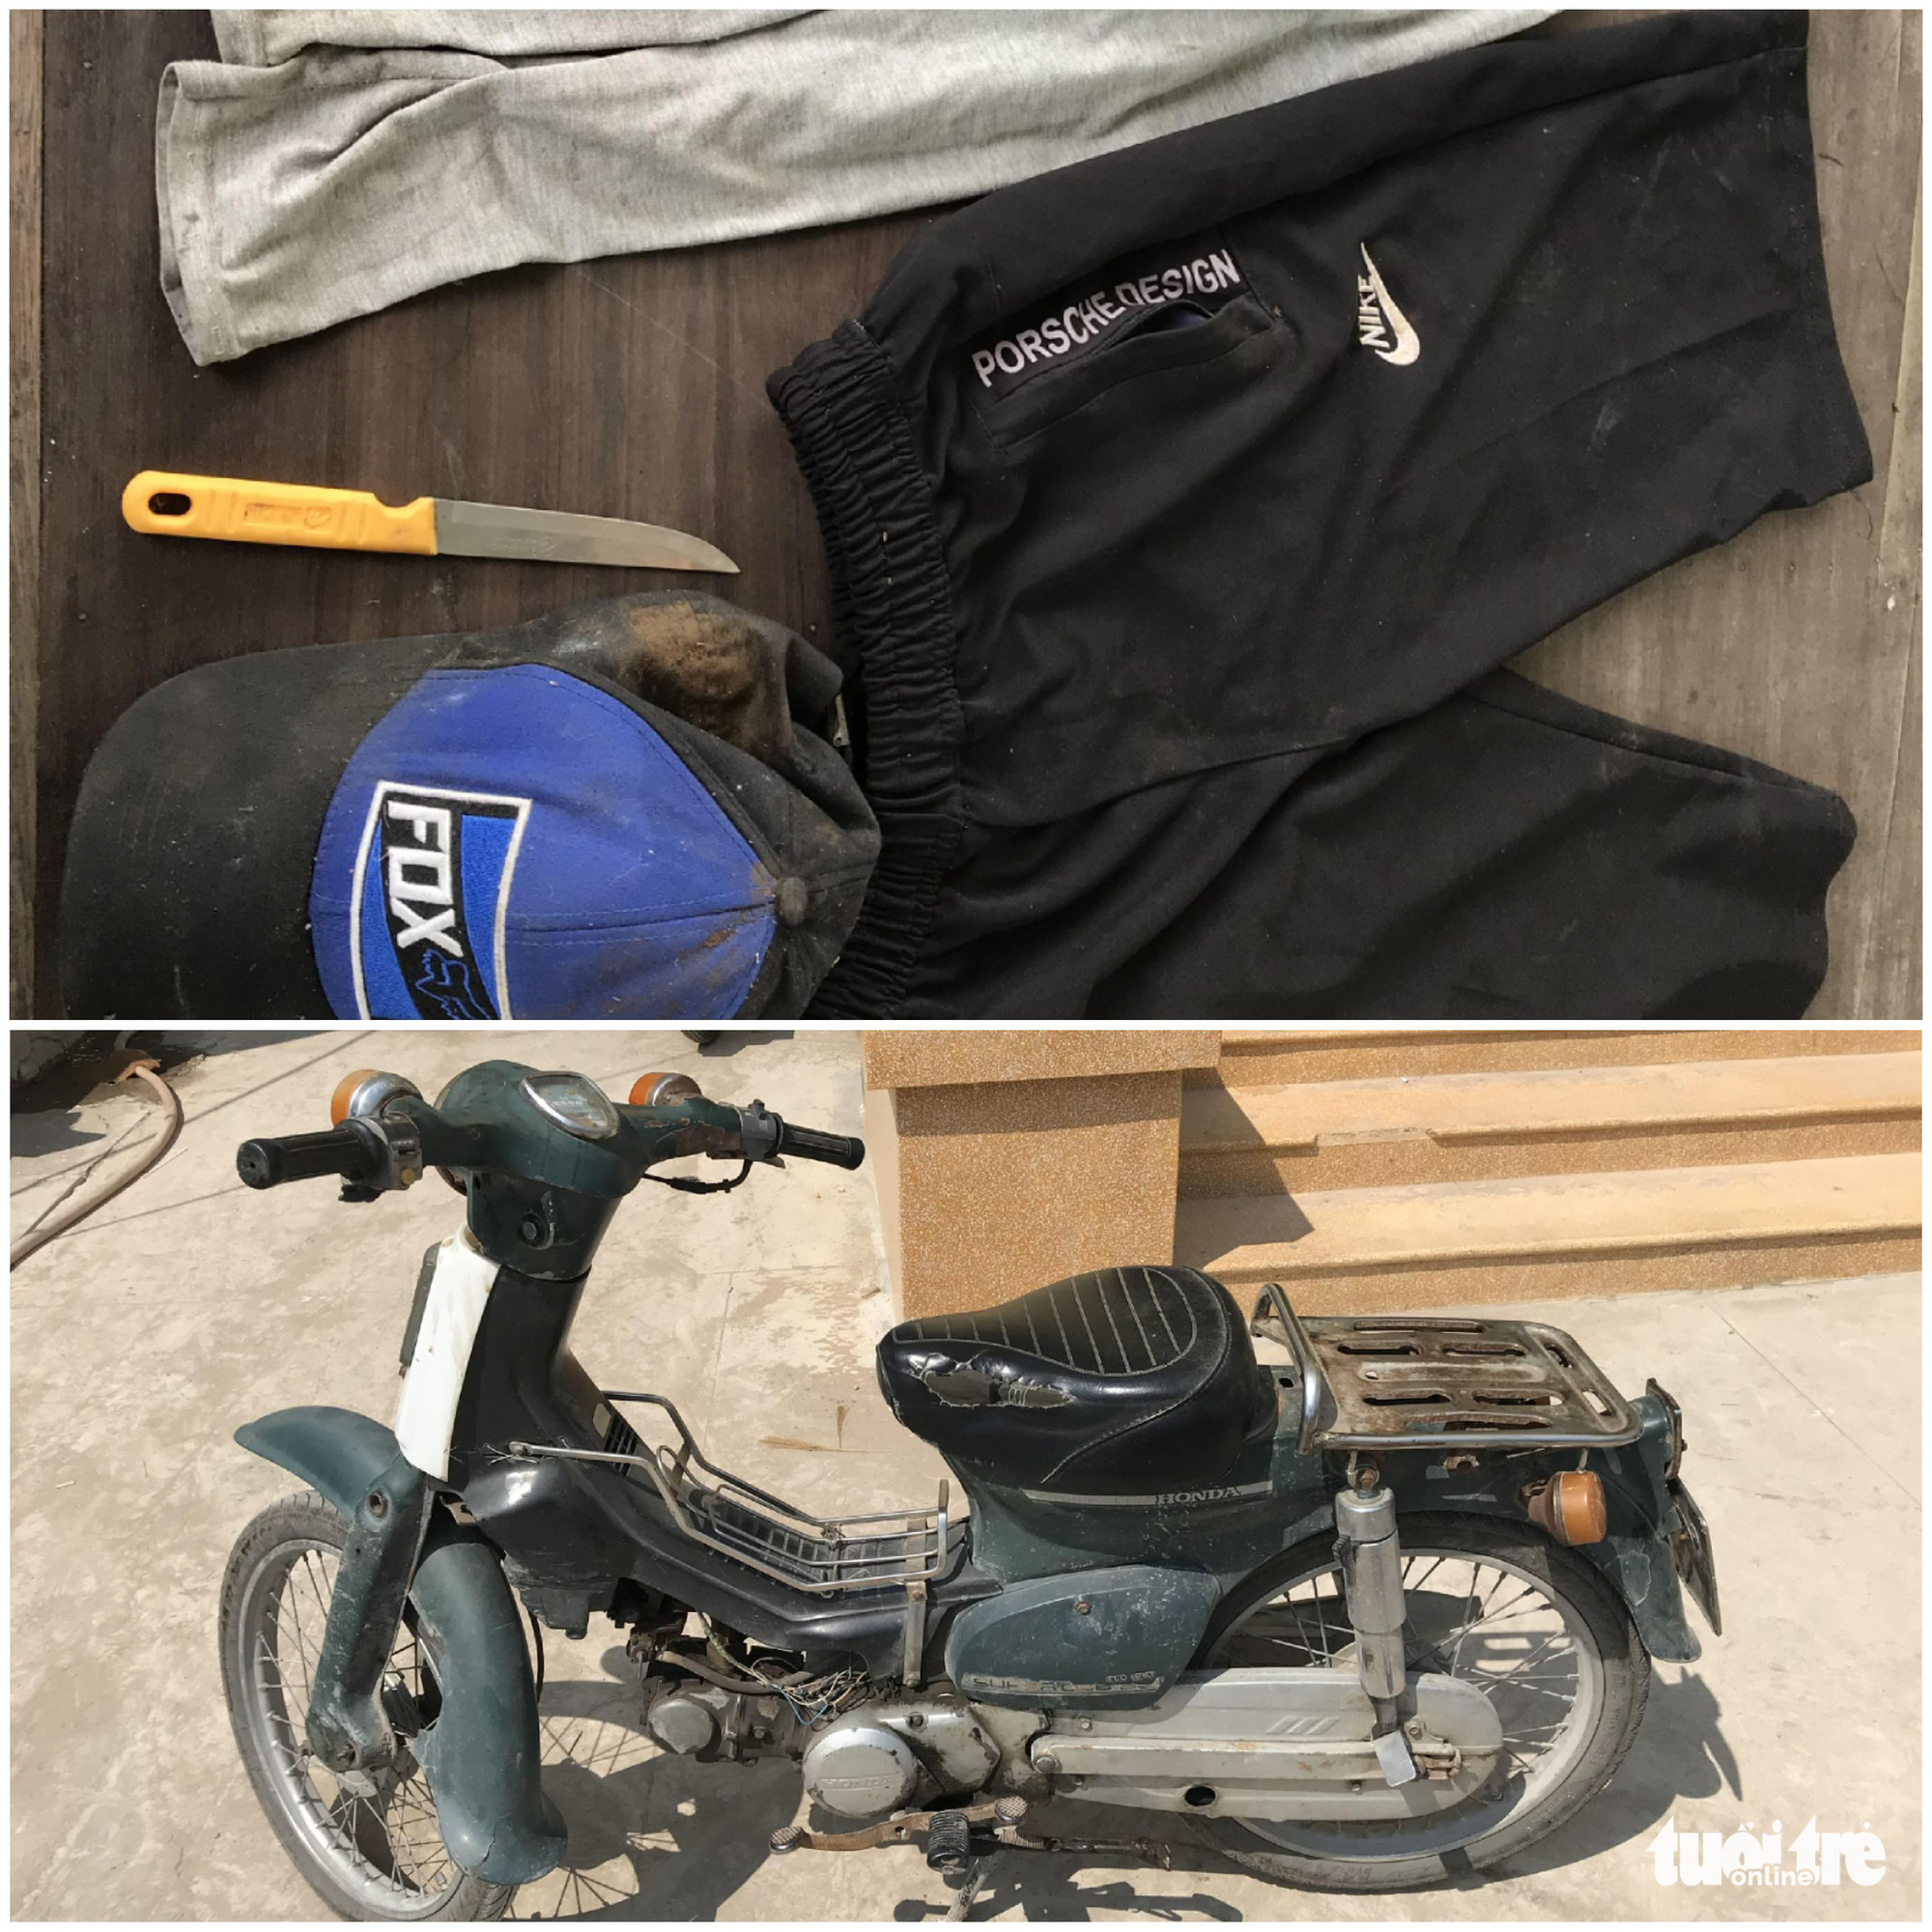 Exhibits related to a robbery in Tien Giang Province, Vietnam on December 10, 2019. Photo: H. T./ Tuoi Tre